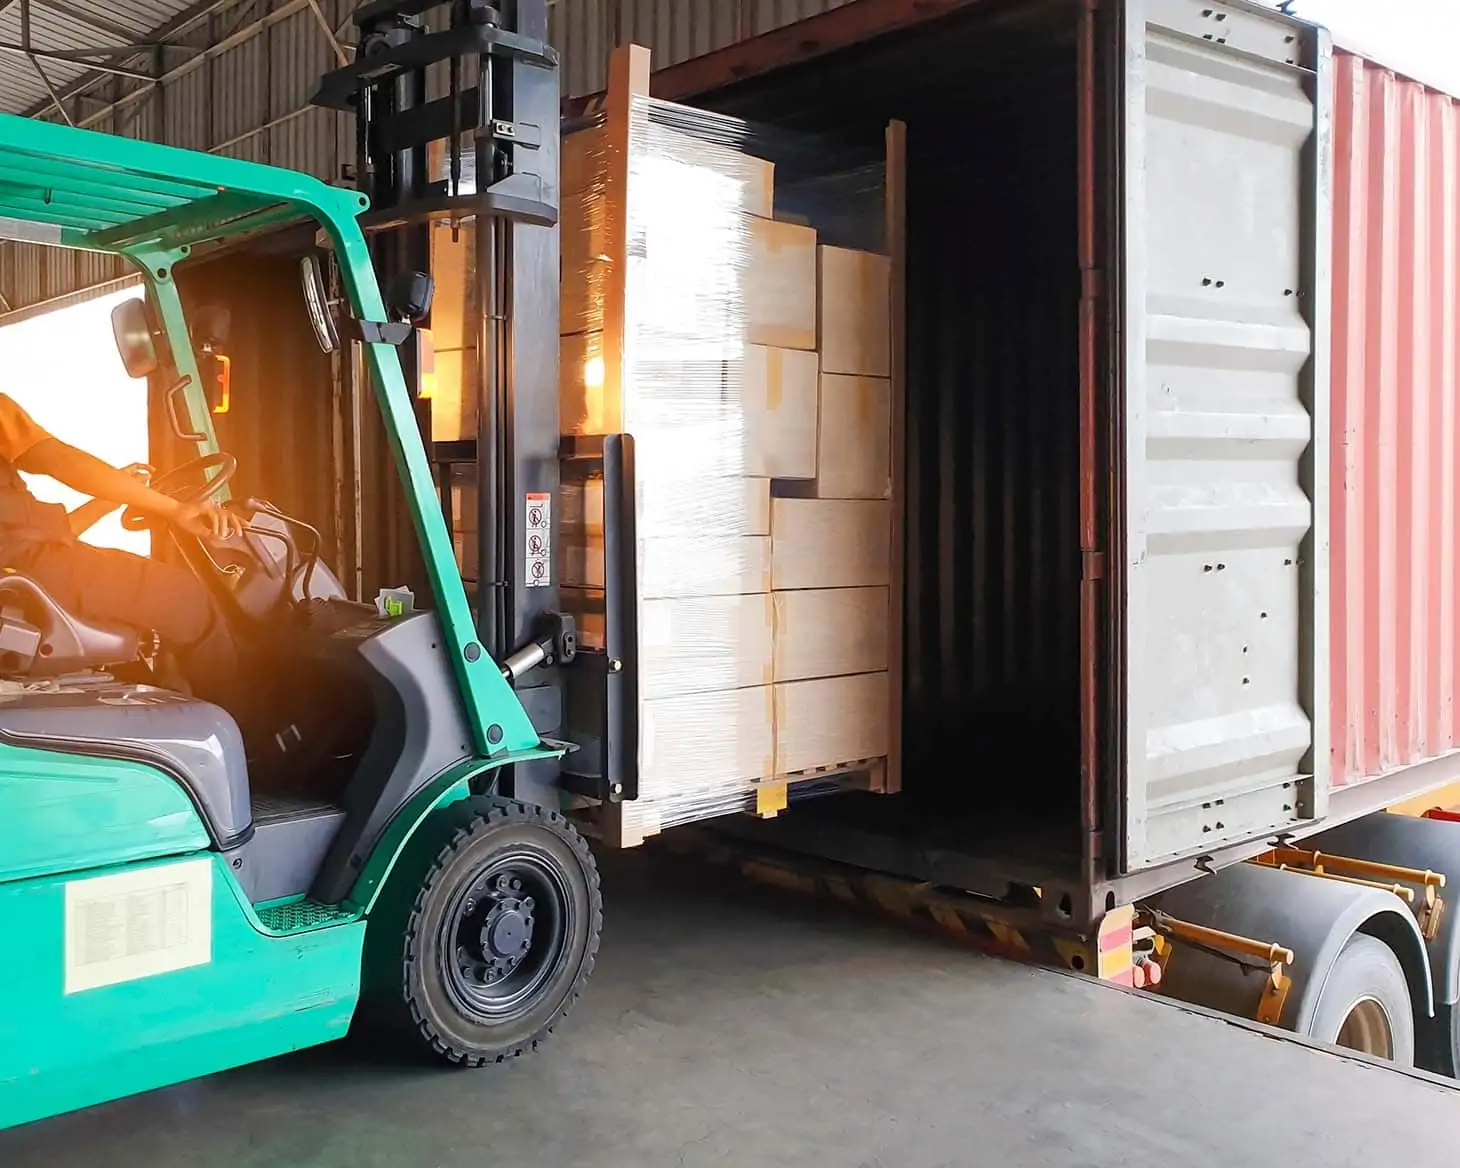 Sea freight being leaded into a container at the warehouse by a forklift